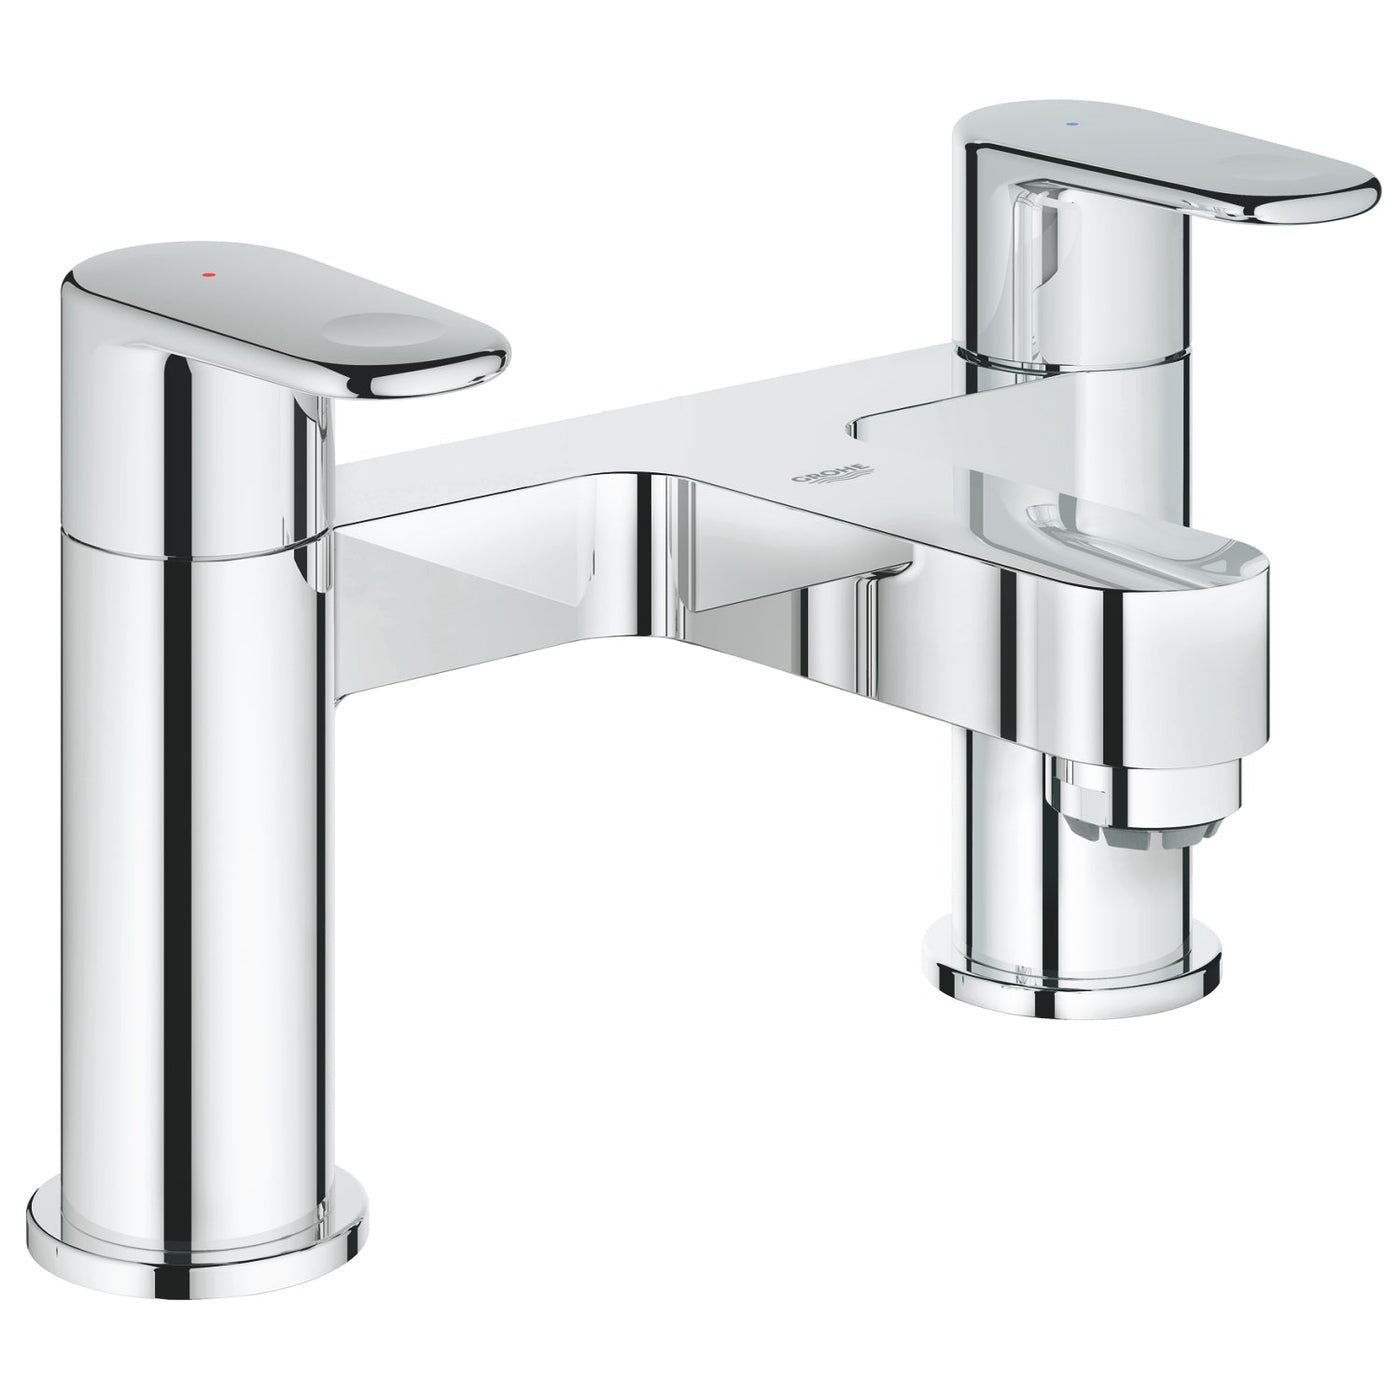 Grohe Deck Mounted Chrome Europlus Two-handled Bath filler 1/2" - Letta London - Deck Mounted Bath Tap